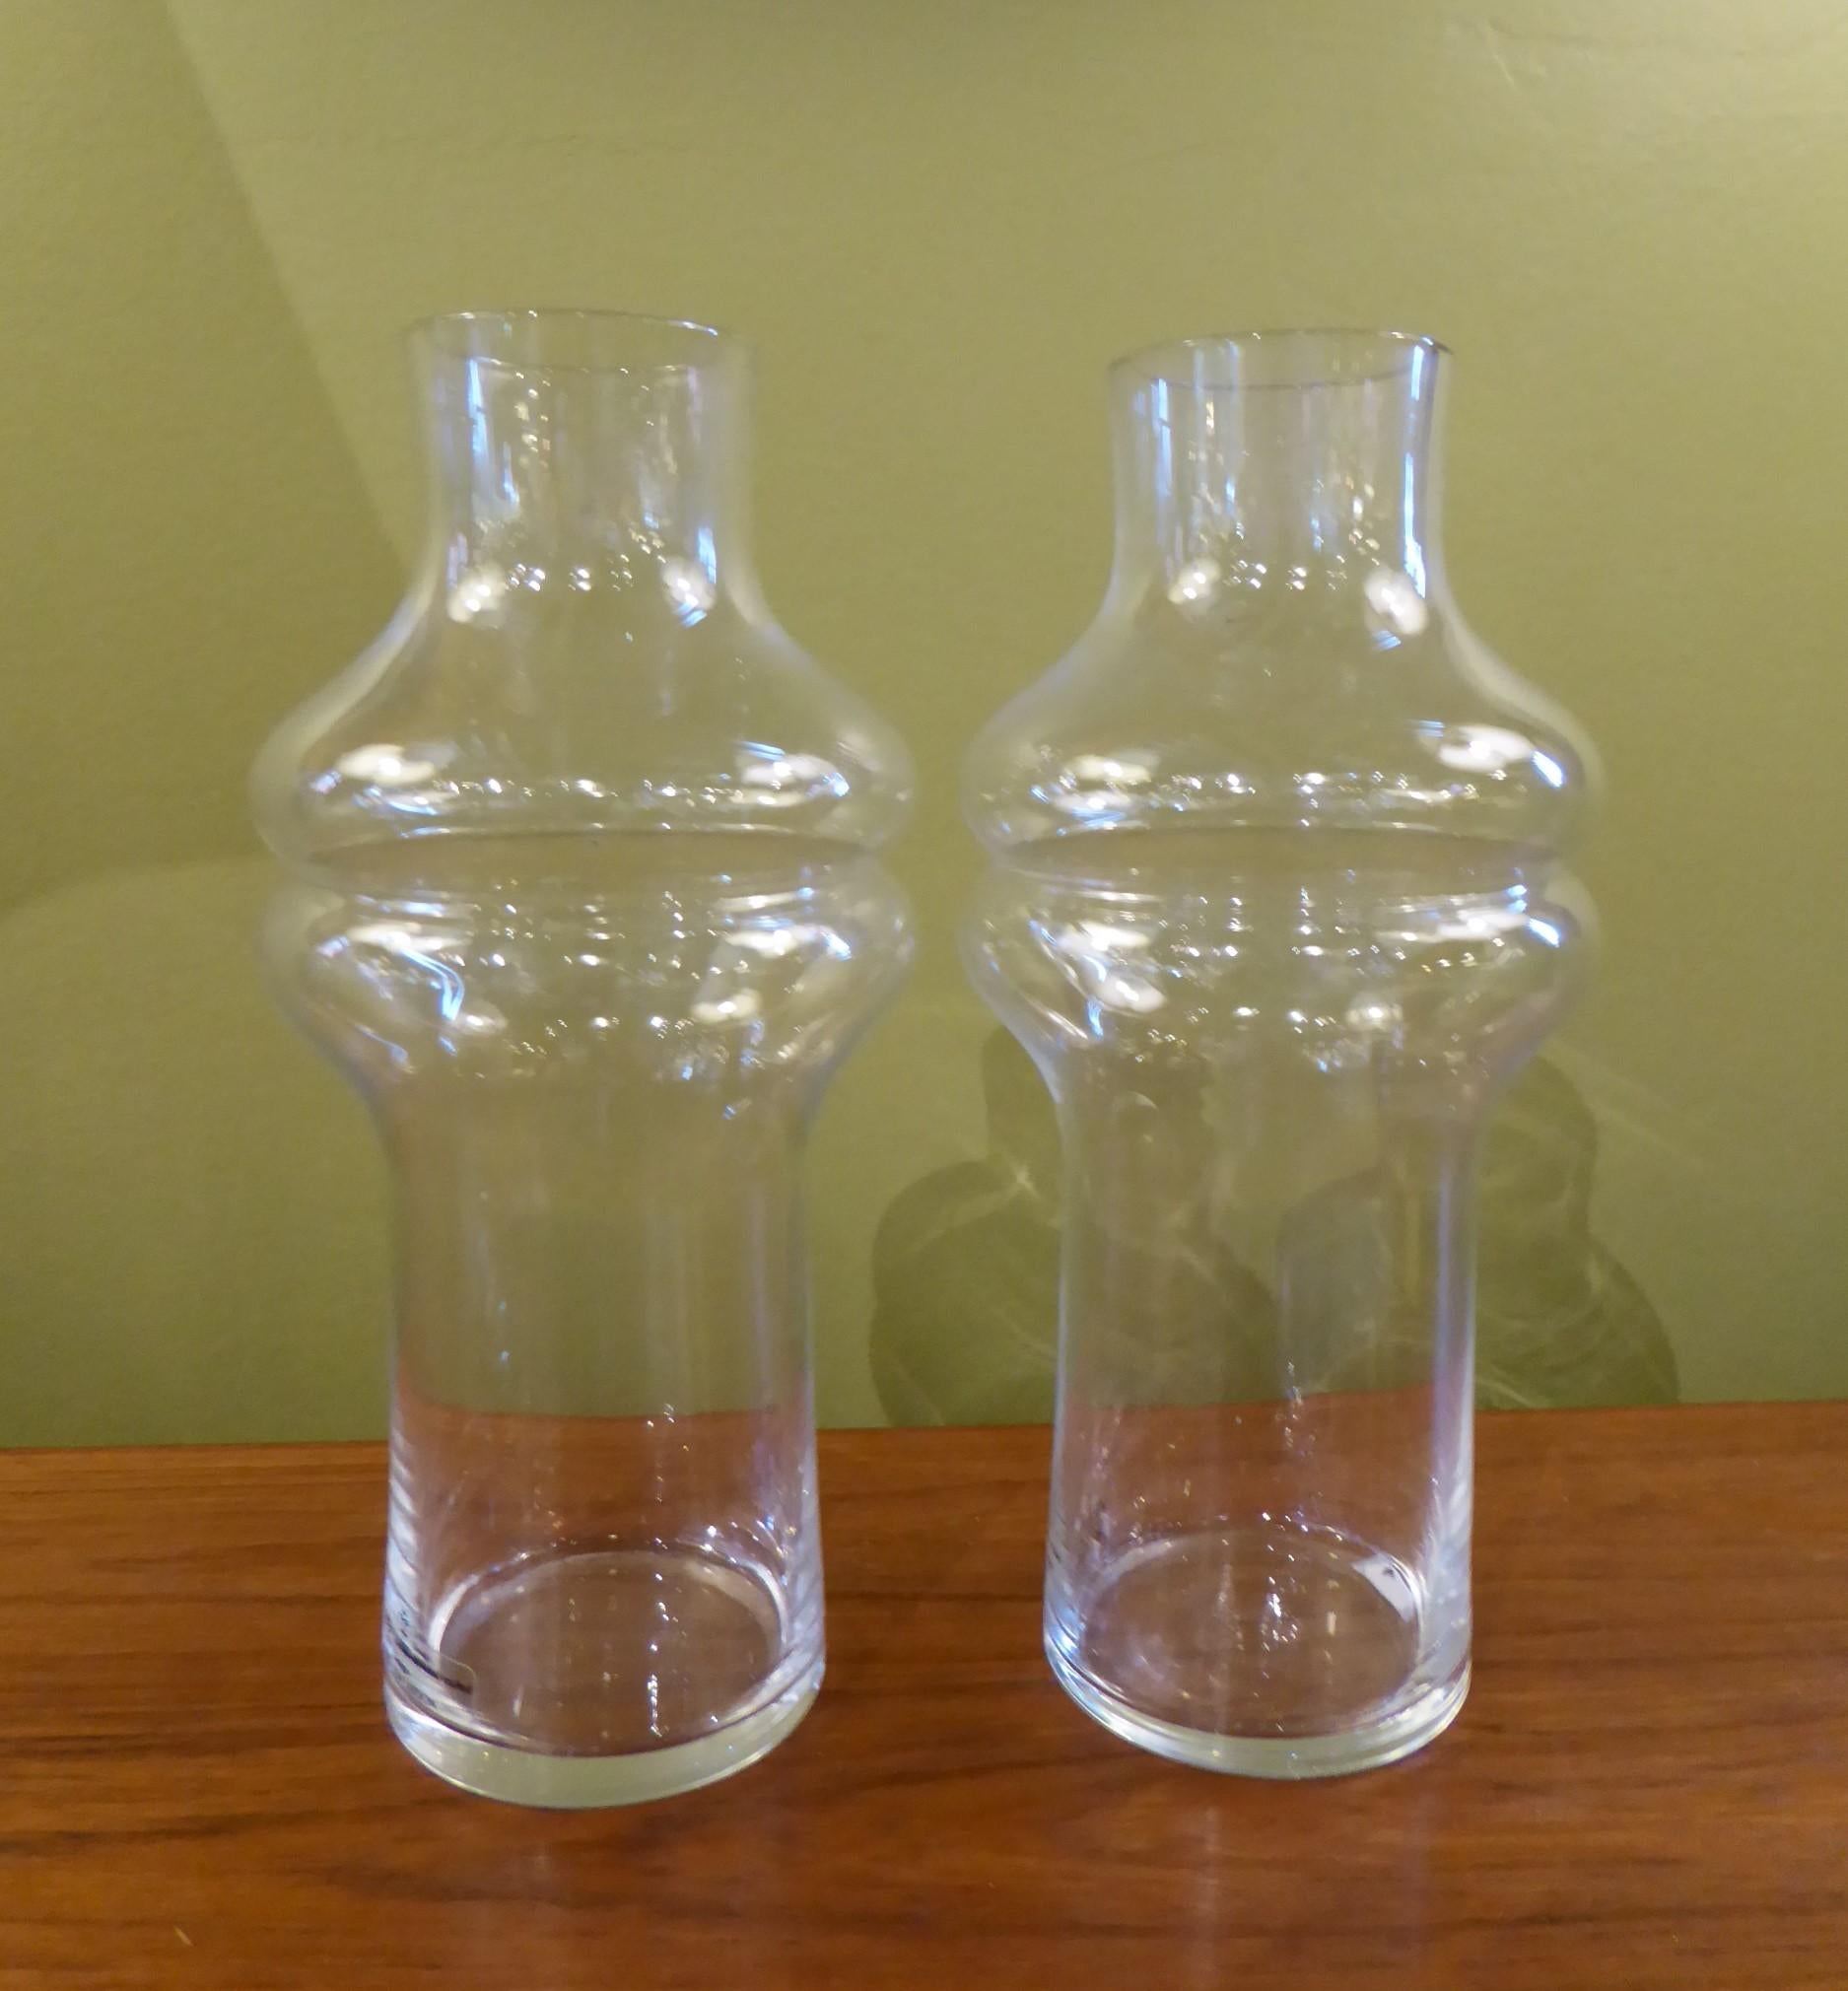 1980 Lisa Larson Skruf Swedish Modern Pair of Shouldered Glass Vases In Excellent Condition For Sale In Miami, FL